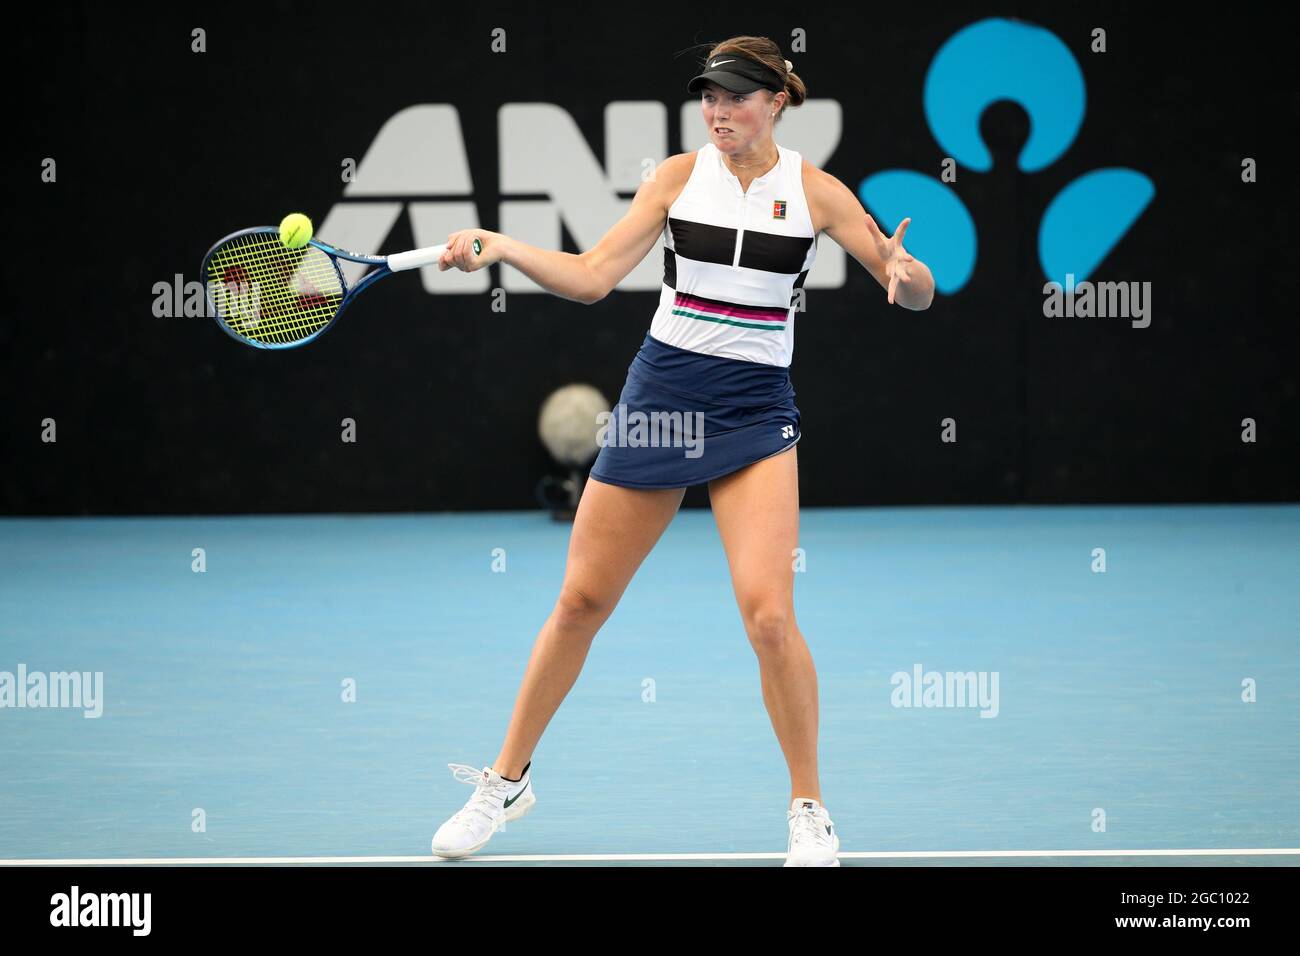 ADELAIDE, AUSTRALIA - FEBRUARY 22: Olivia Gadecki of Australia plays a forehand against Qiang Wang of China during their singles match on day one of the Adelaide International tennis tournament at Memorial Drive on February 22, 2021 in Adelaide, Australia.  Credit: Peter Mundy/Speed Media/Alamy Live News Stock Photo